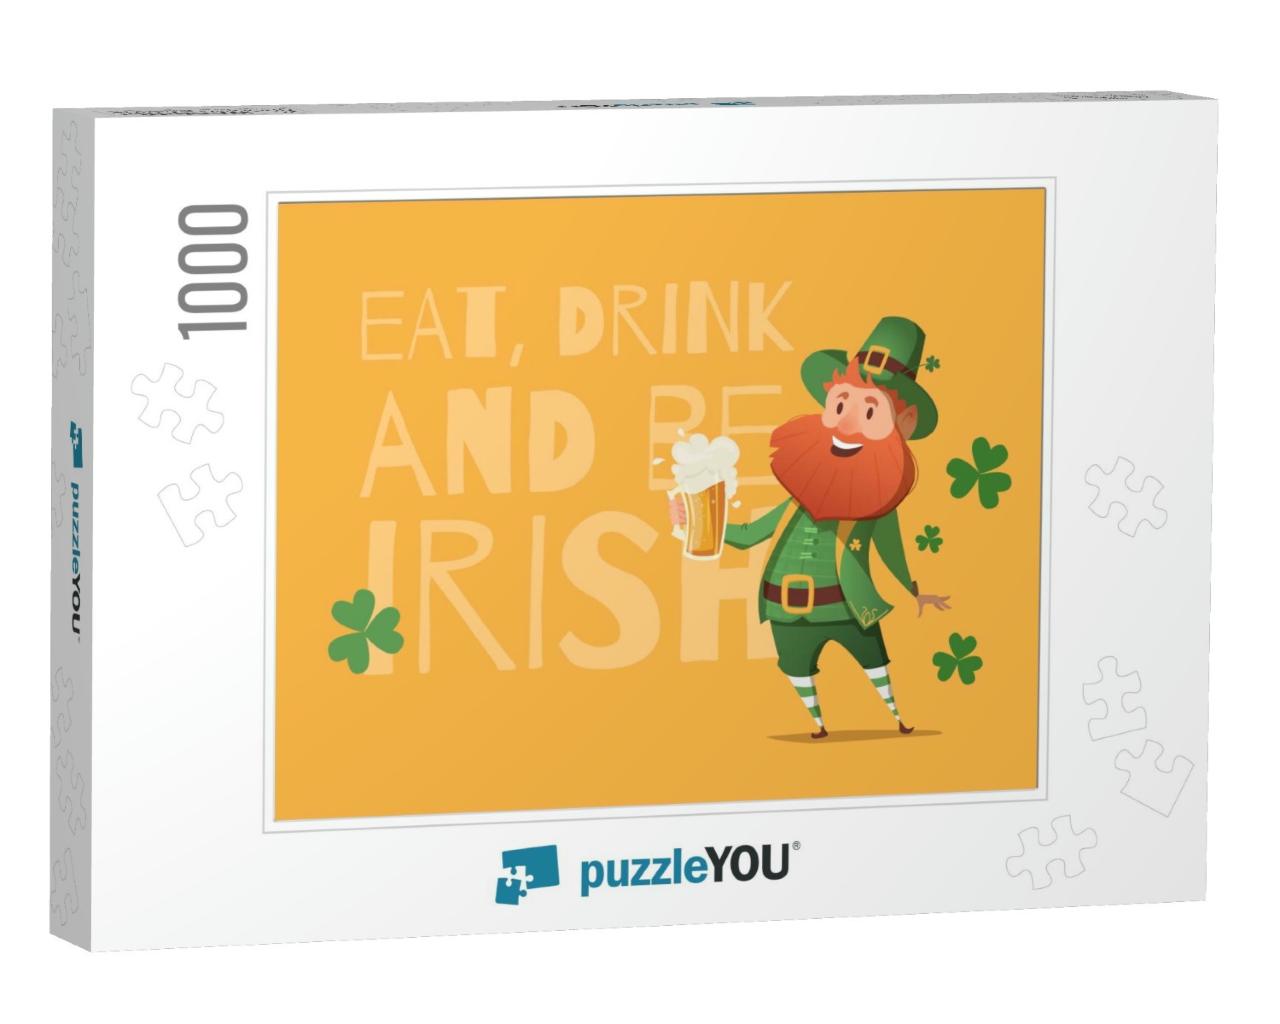 Card for St. Patrick's Day with Leprechaun in a... Jigsaw Puzzle with 1000 pieces